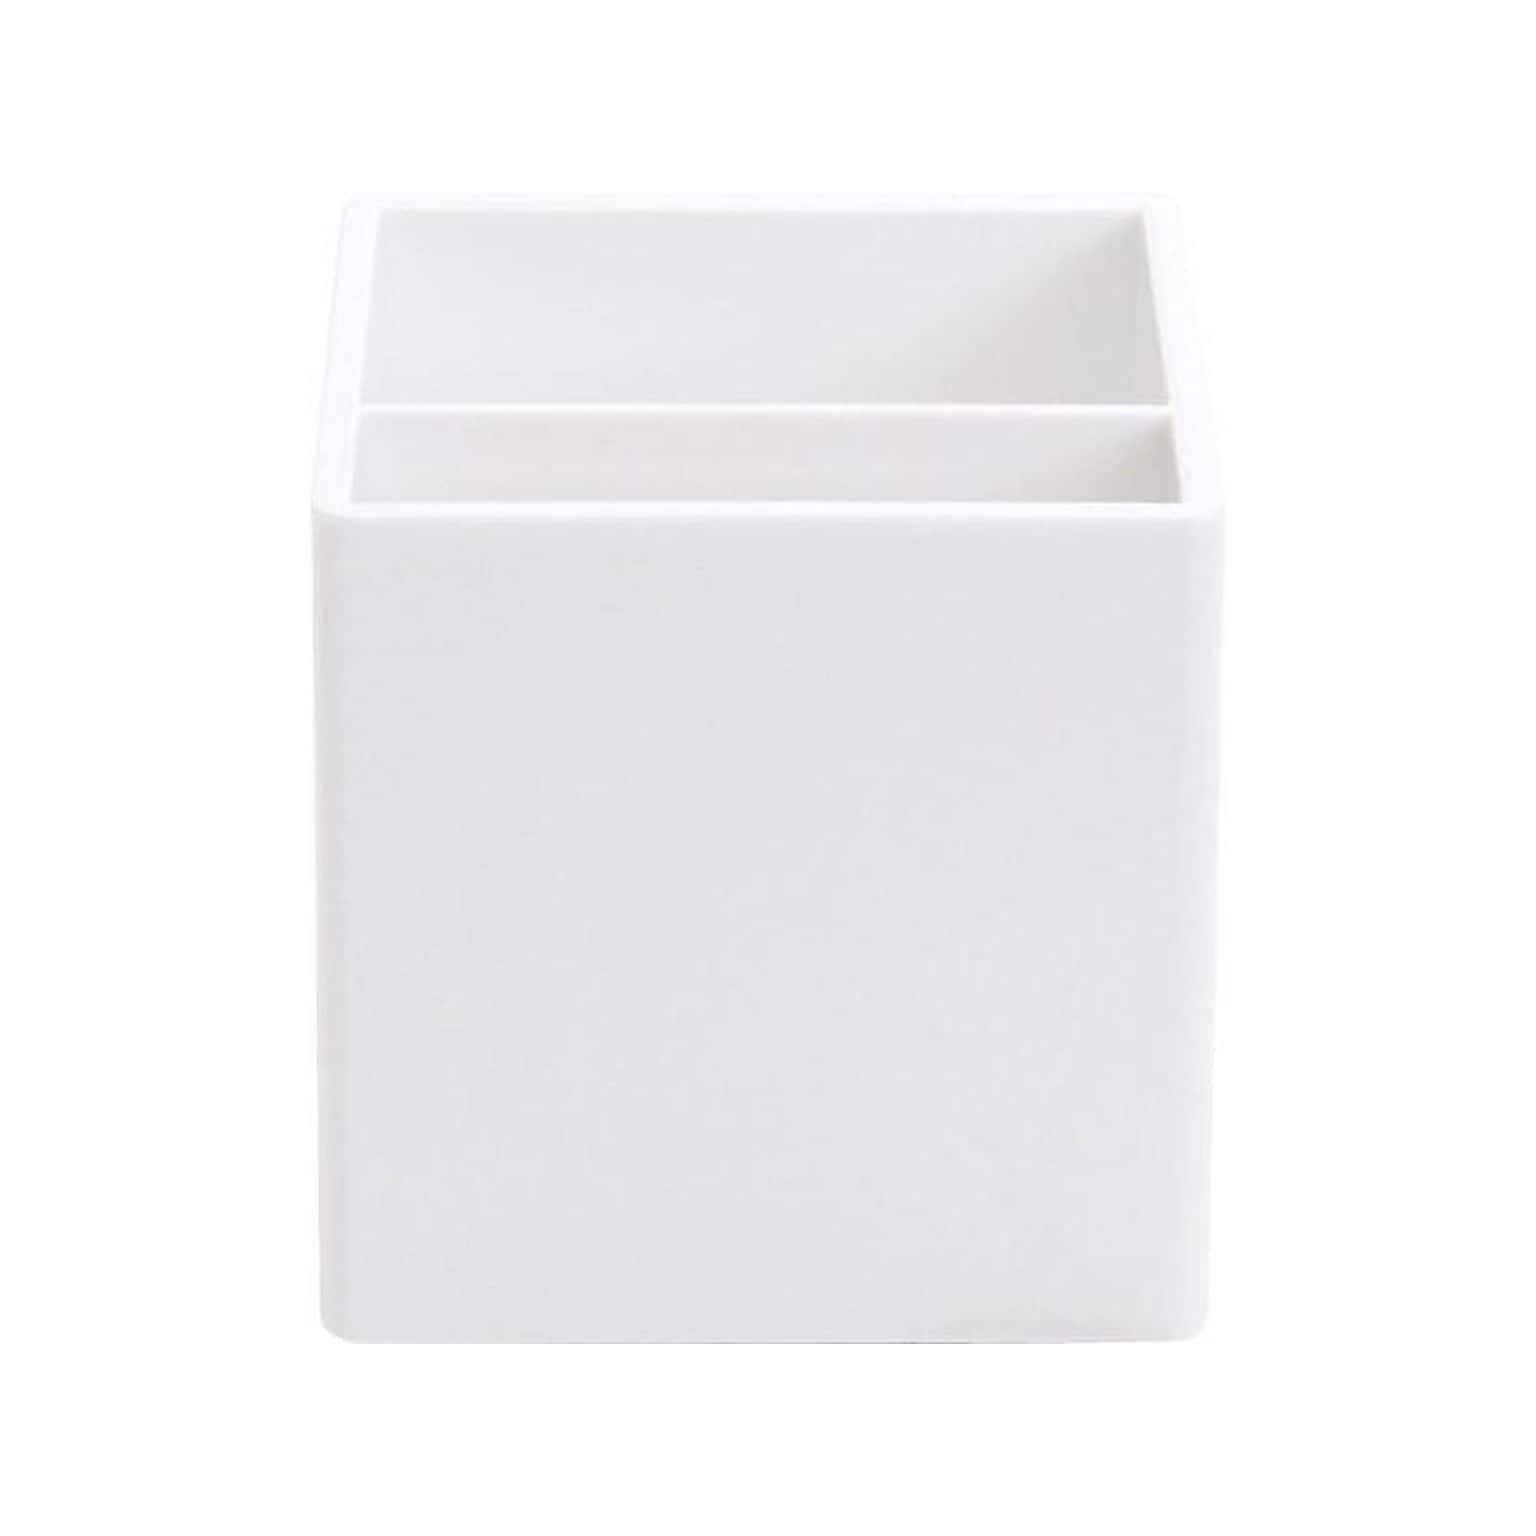 Poppin Plastic Pen Cup, White (100259)